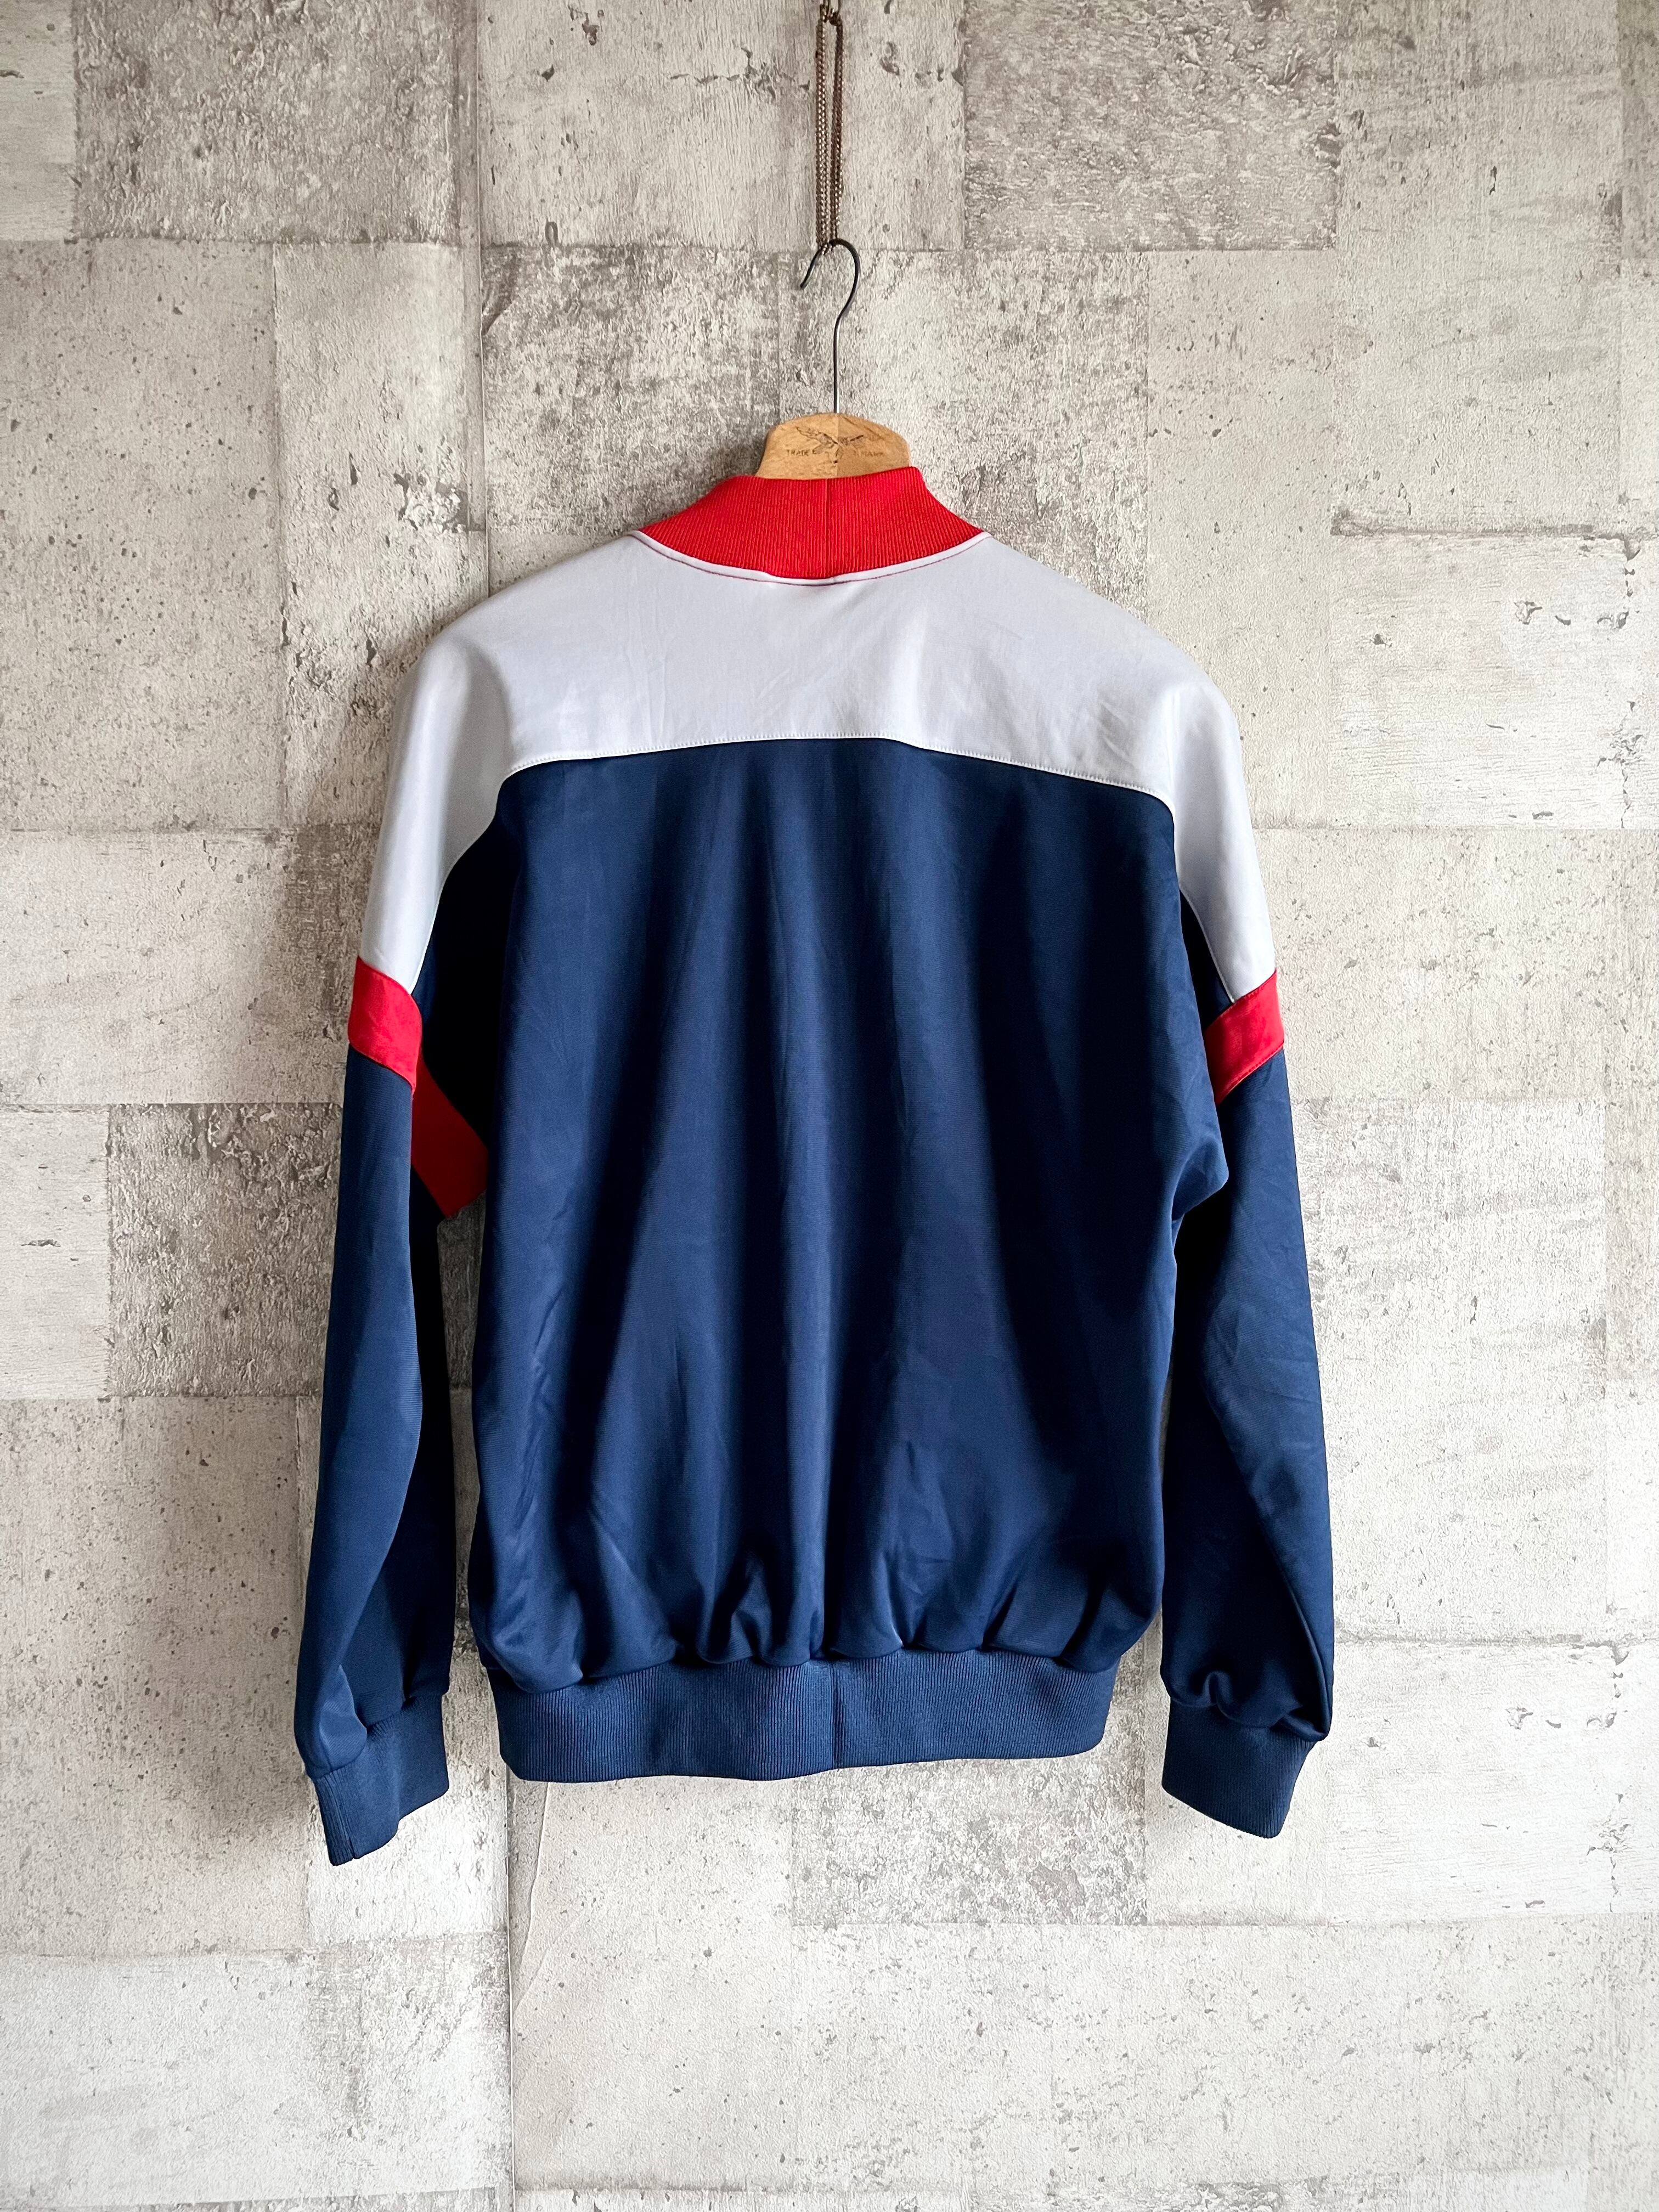 80s USA製 ADIDAS TRUCK JACKET TRICOLORE OLD VINTAGE アメリカ製